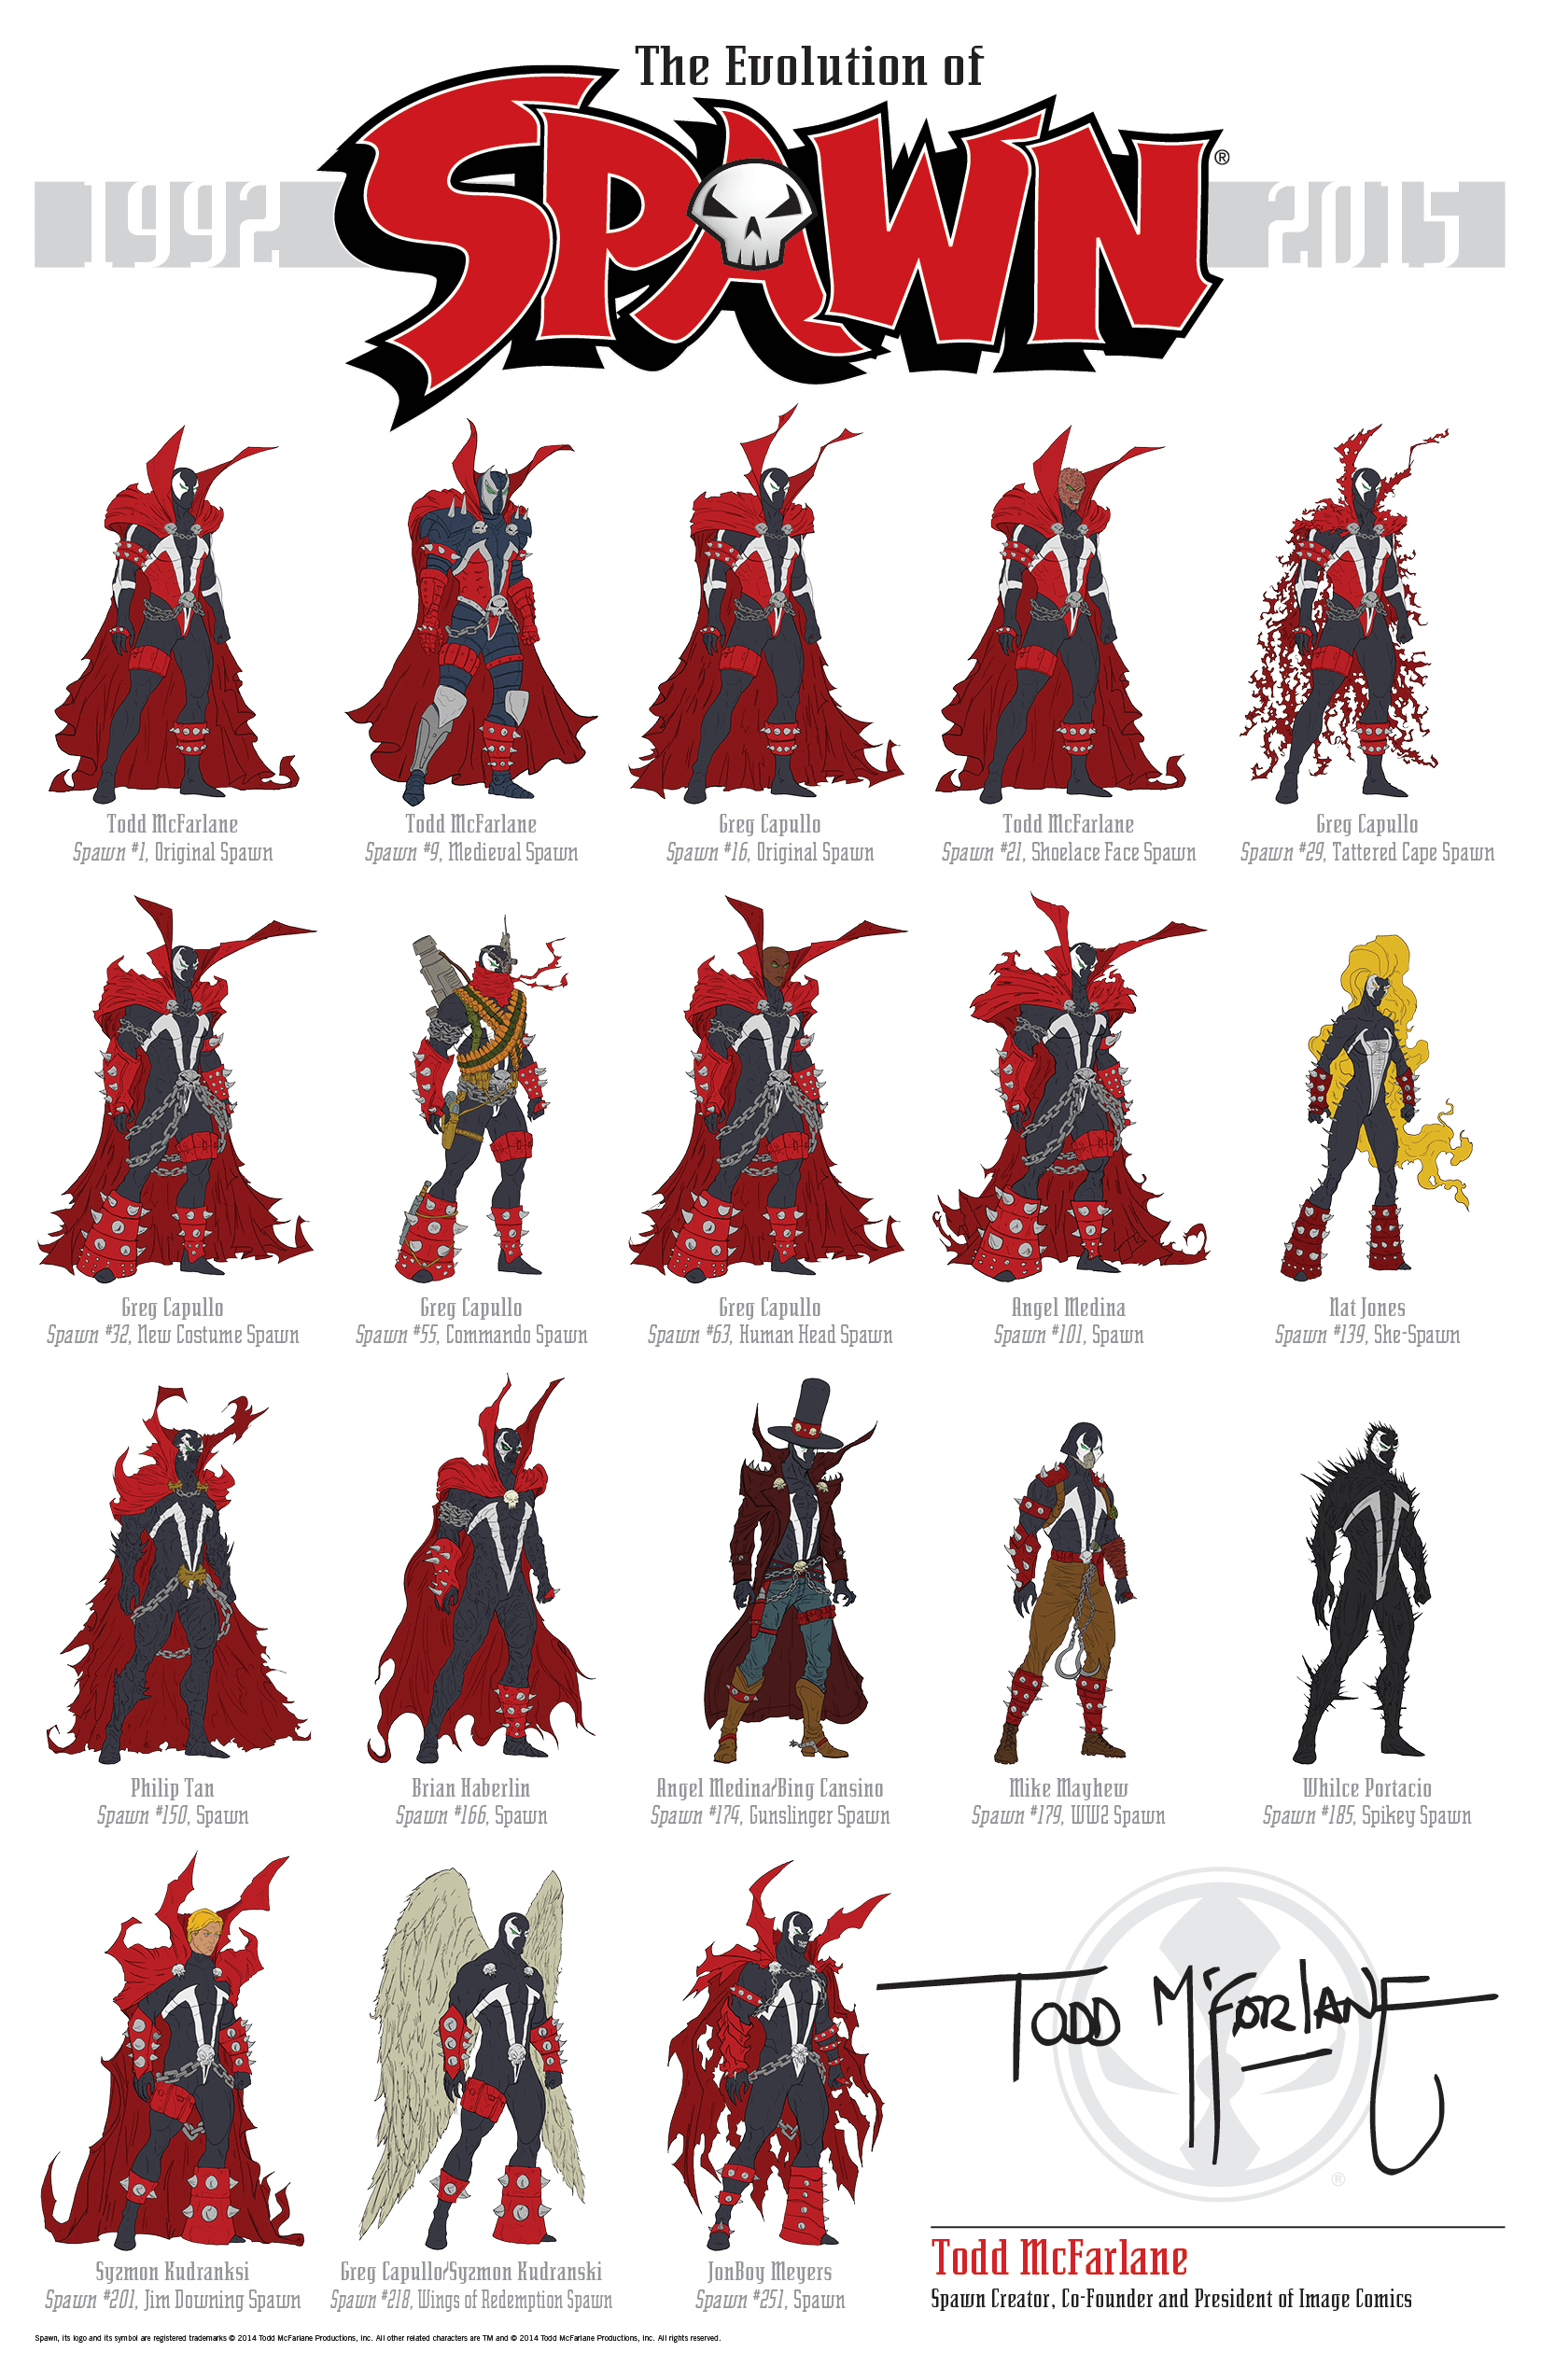 The Visual Evolution Of Spawn